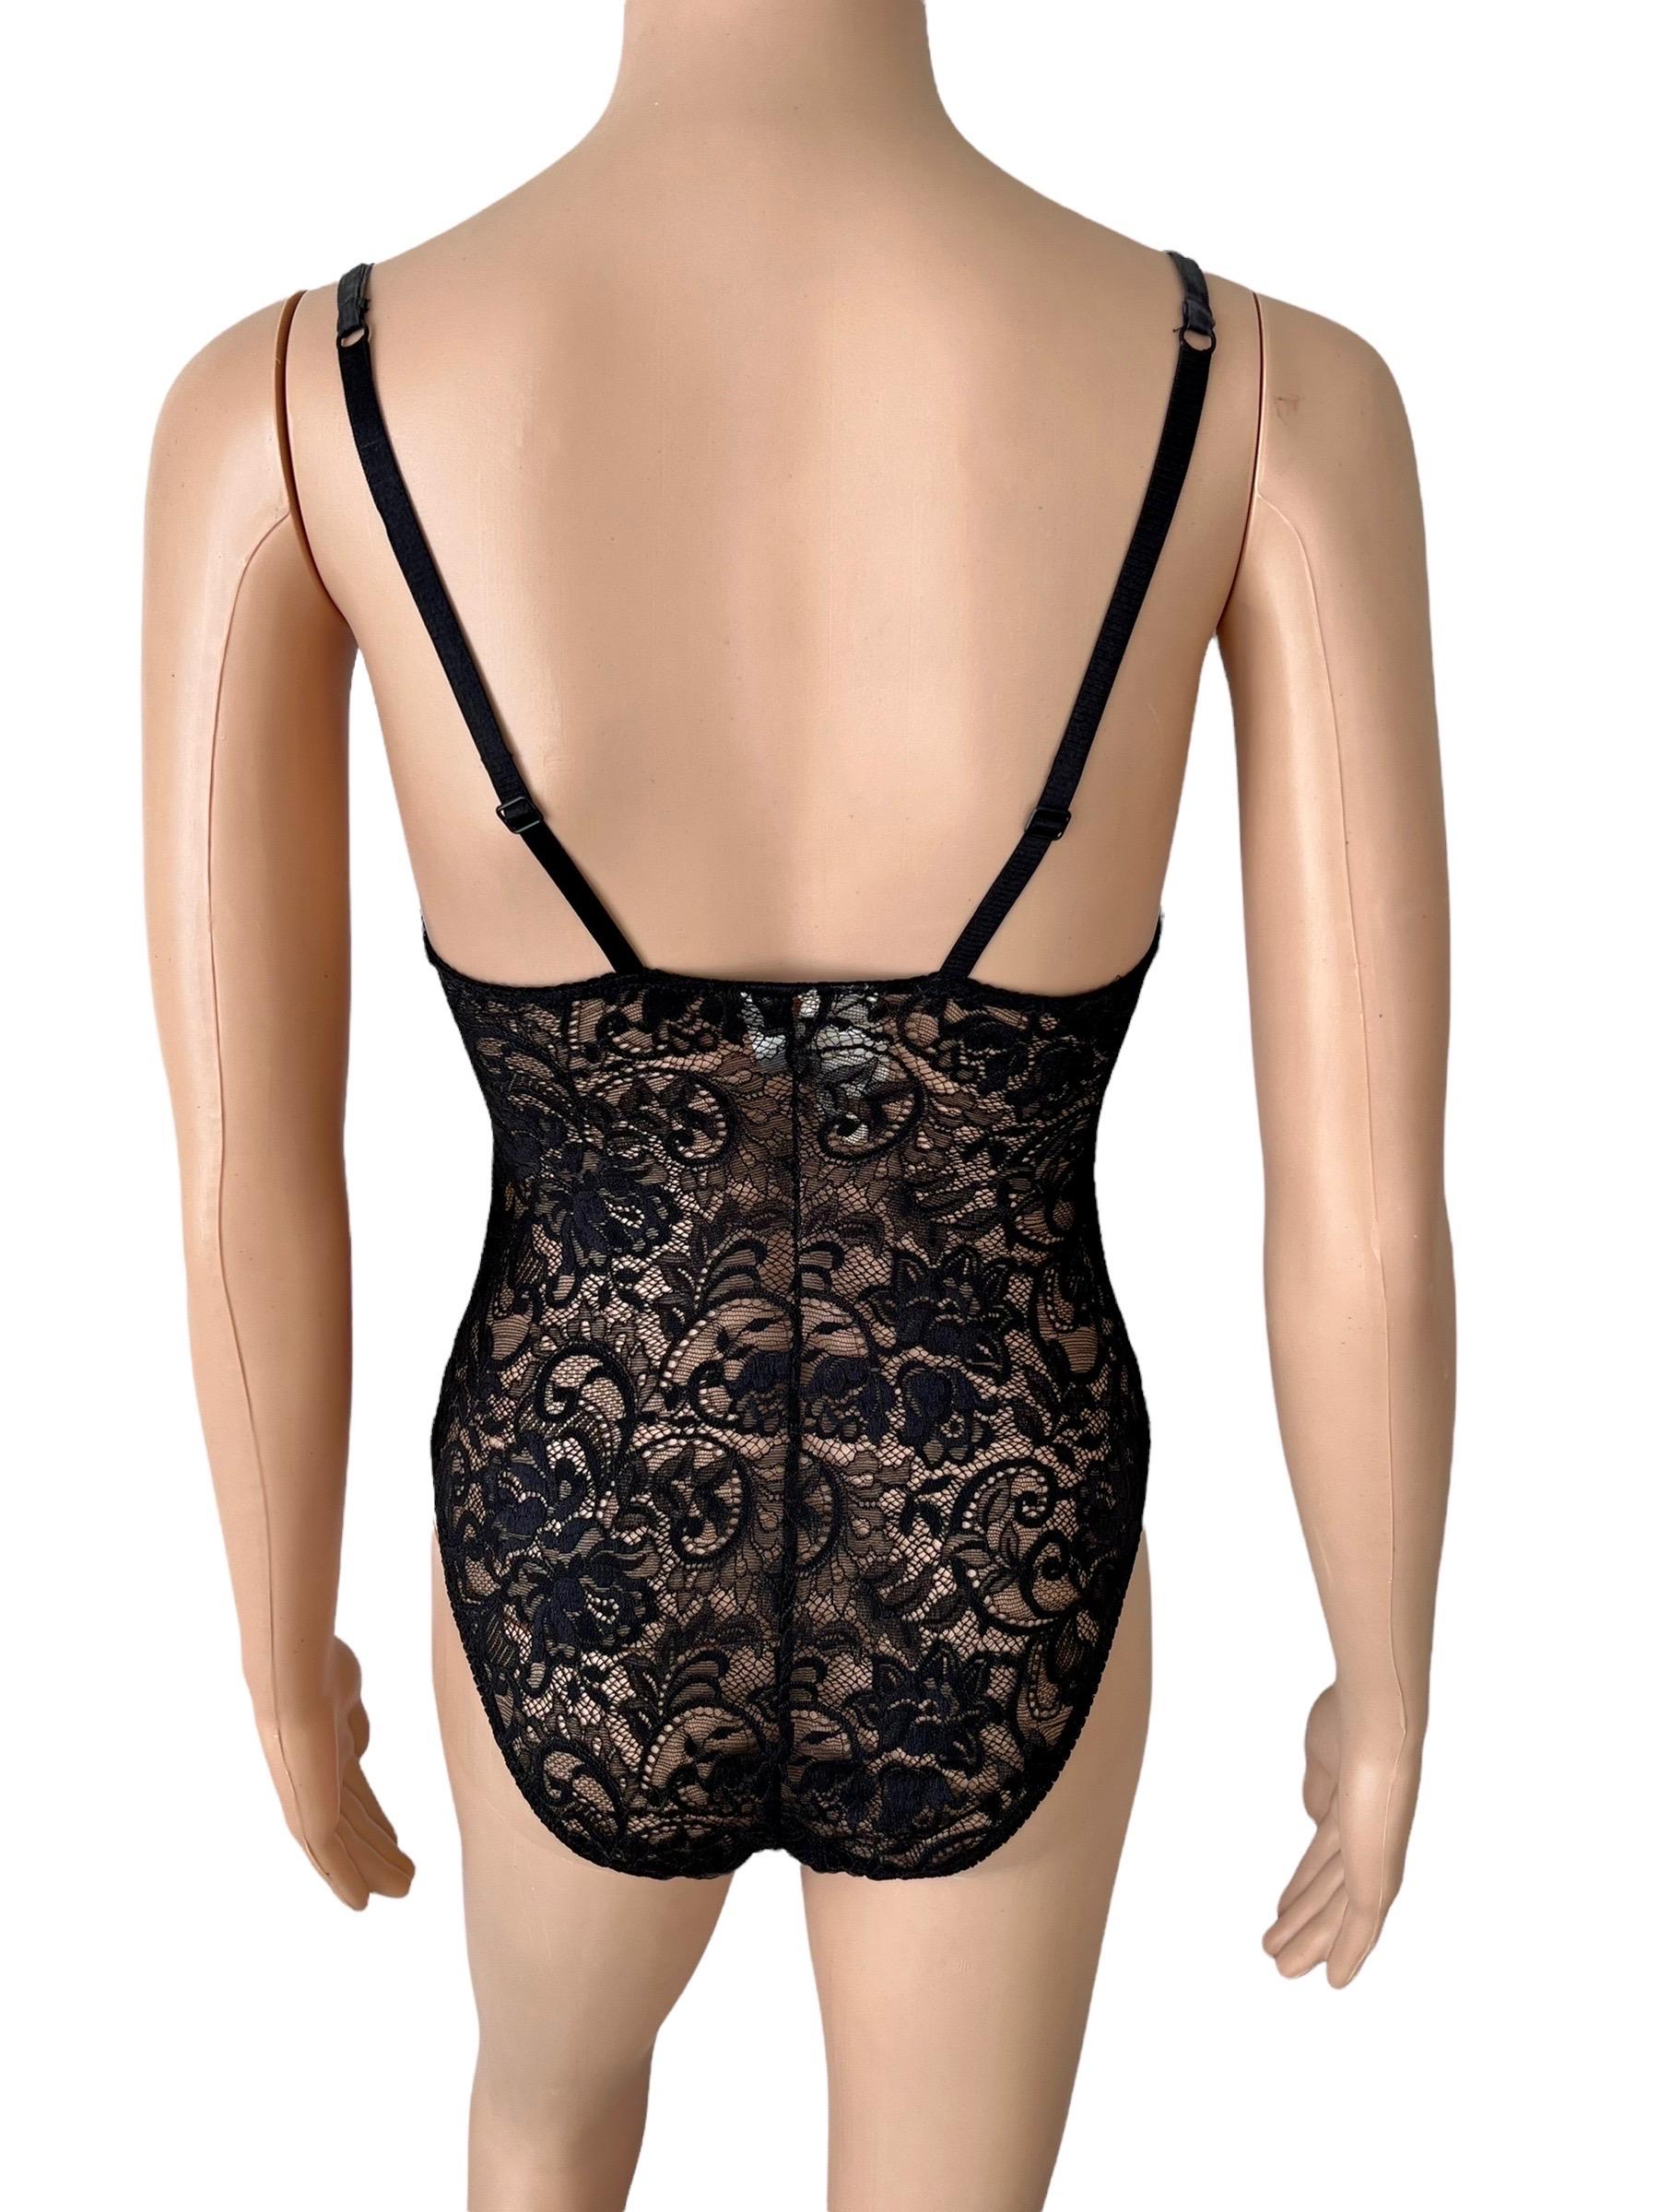 Gianni Versace S/S 1992 Vintage Plunging Baroque Print Sheer Lace Bodysuit Top  In Good Condition For Sale In Naples, FL